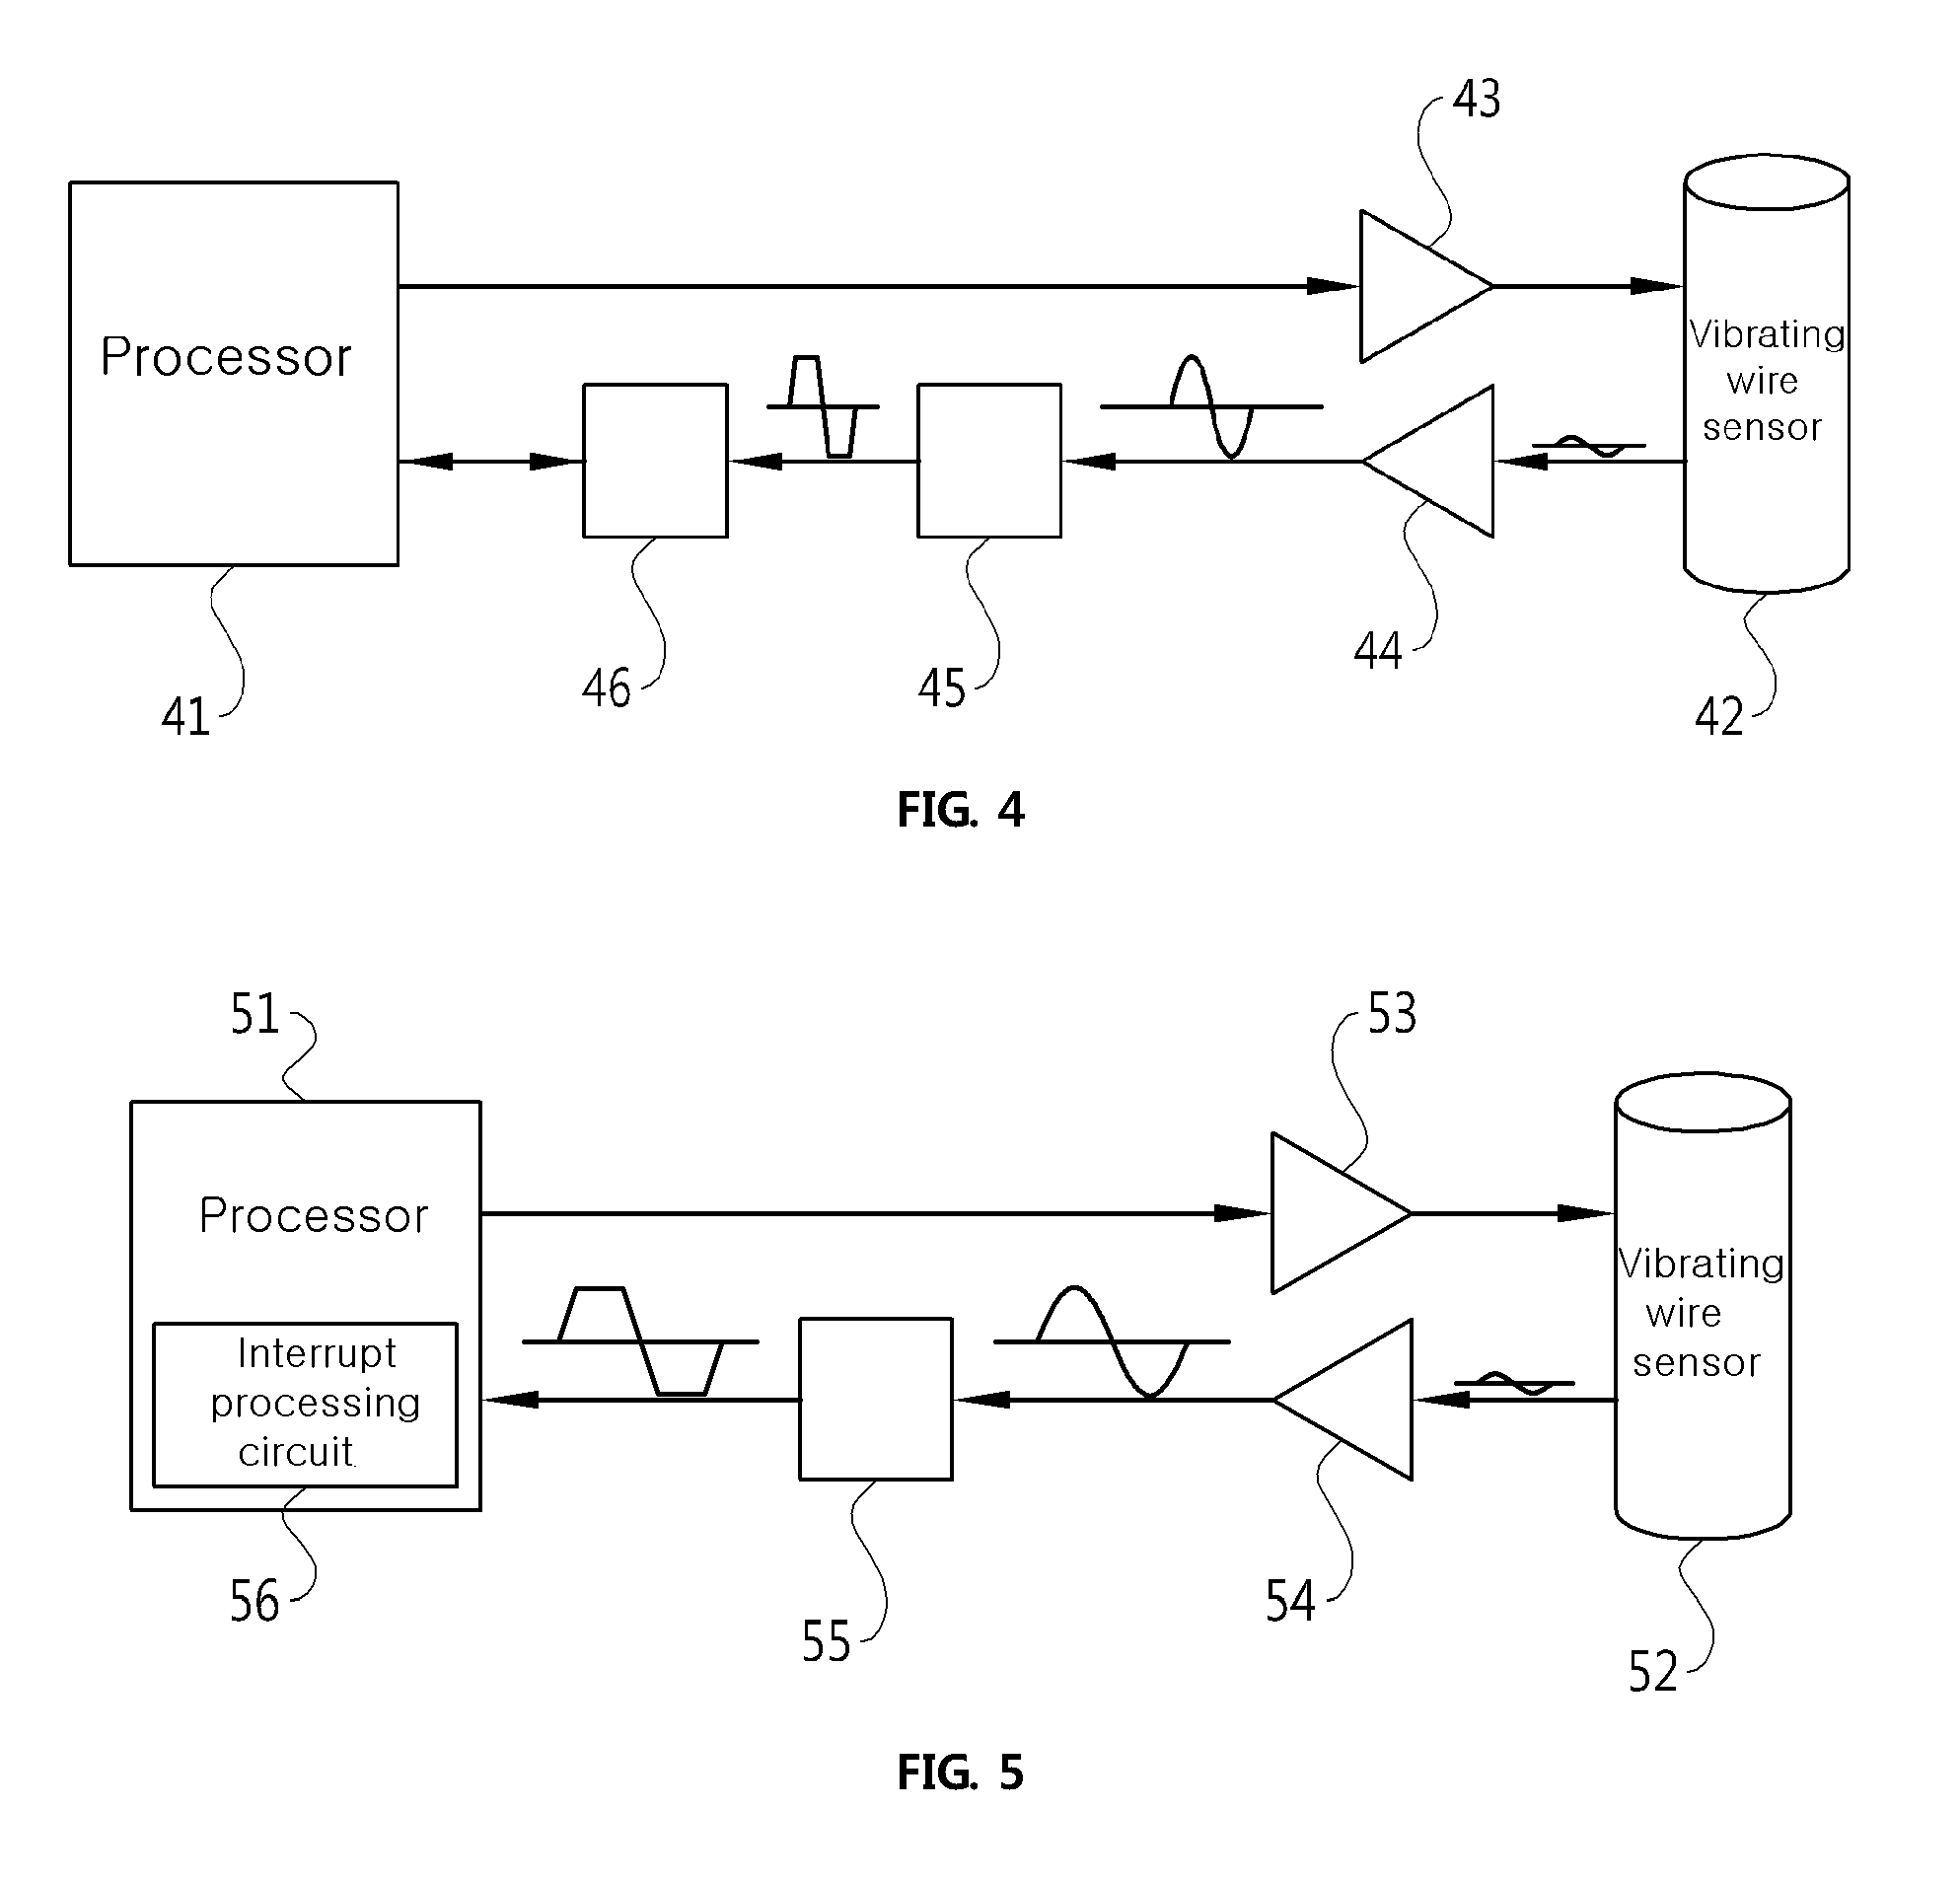 System for measuring the frequency of a vibrating wire sensor using a digital counter system